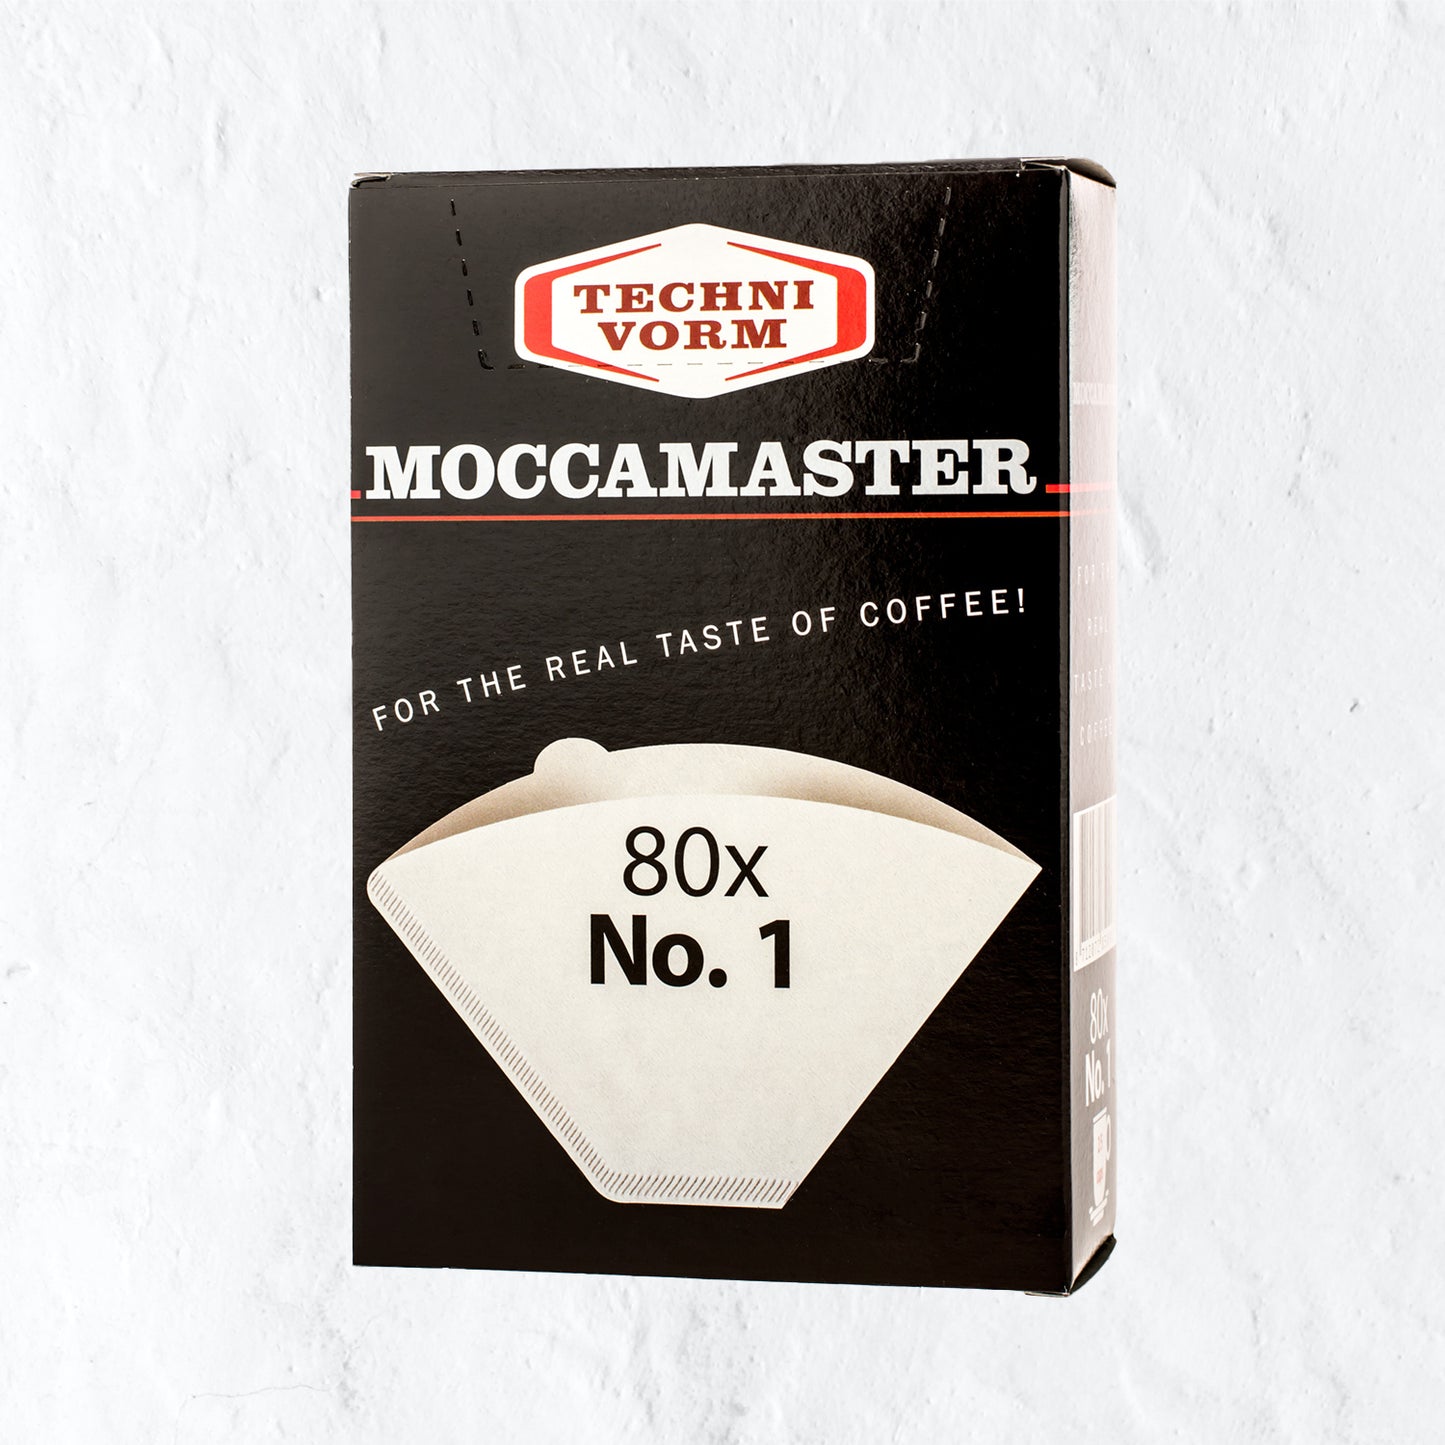 Moccamaster paper filters #4